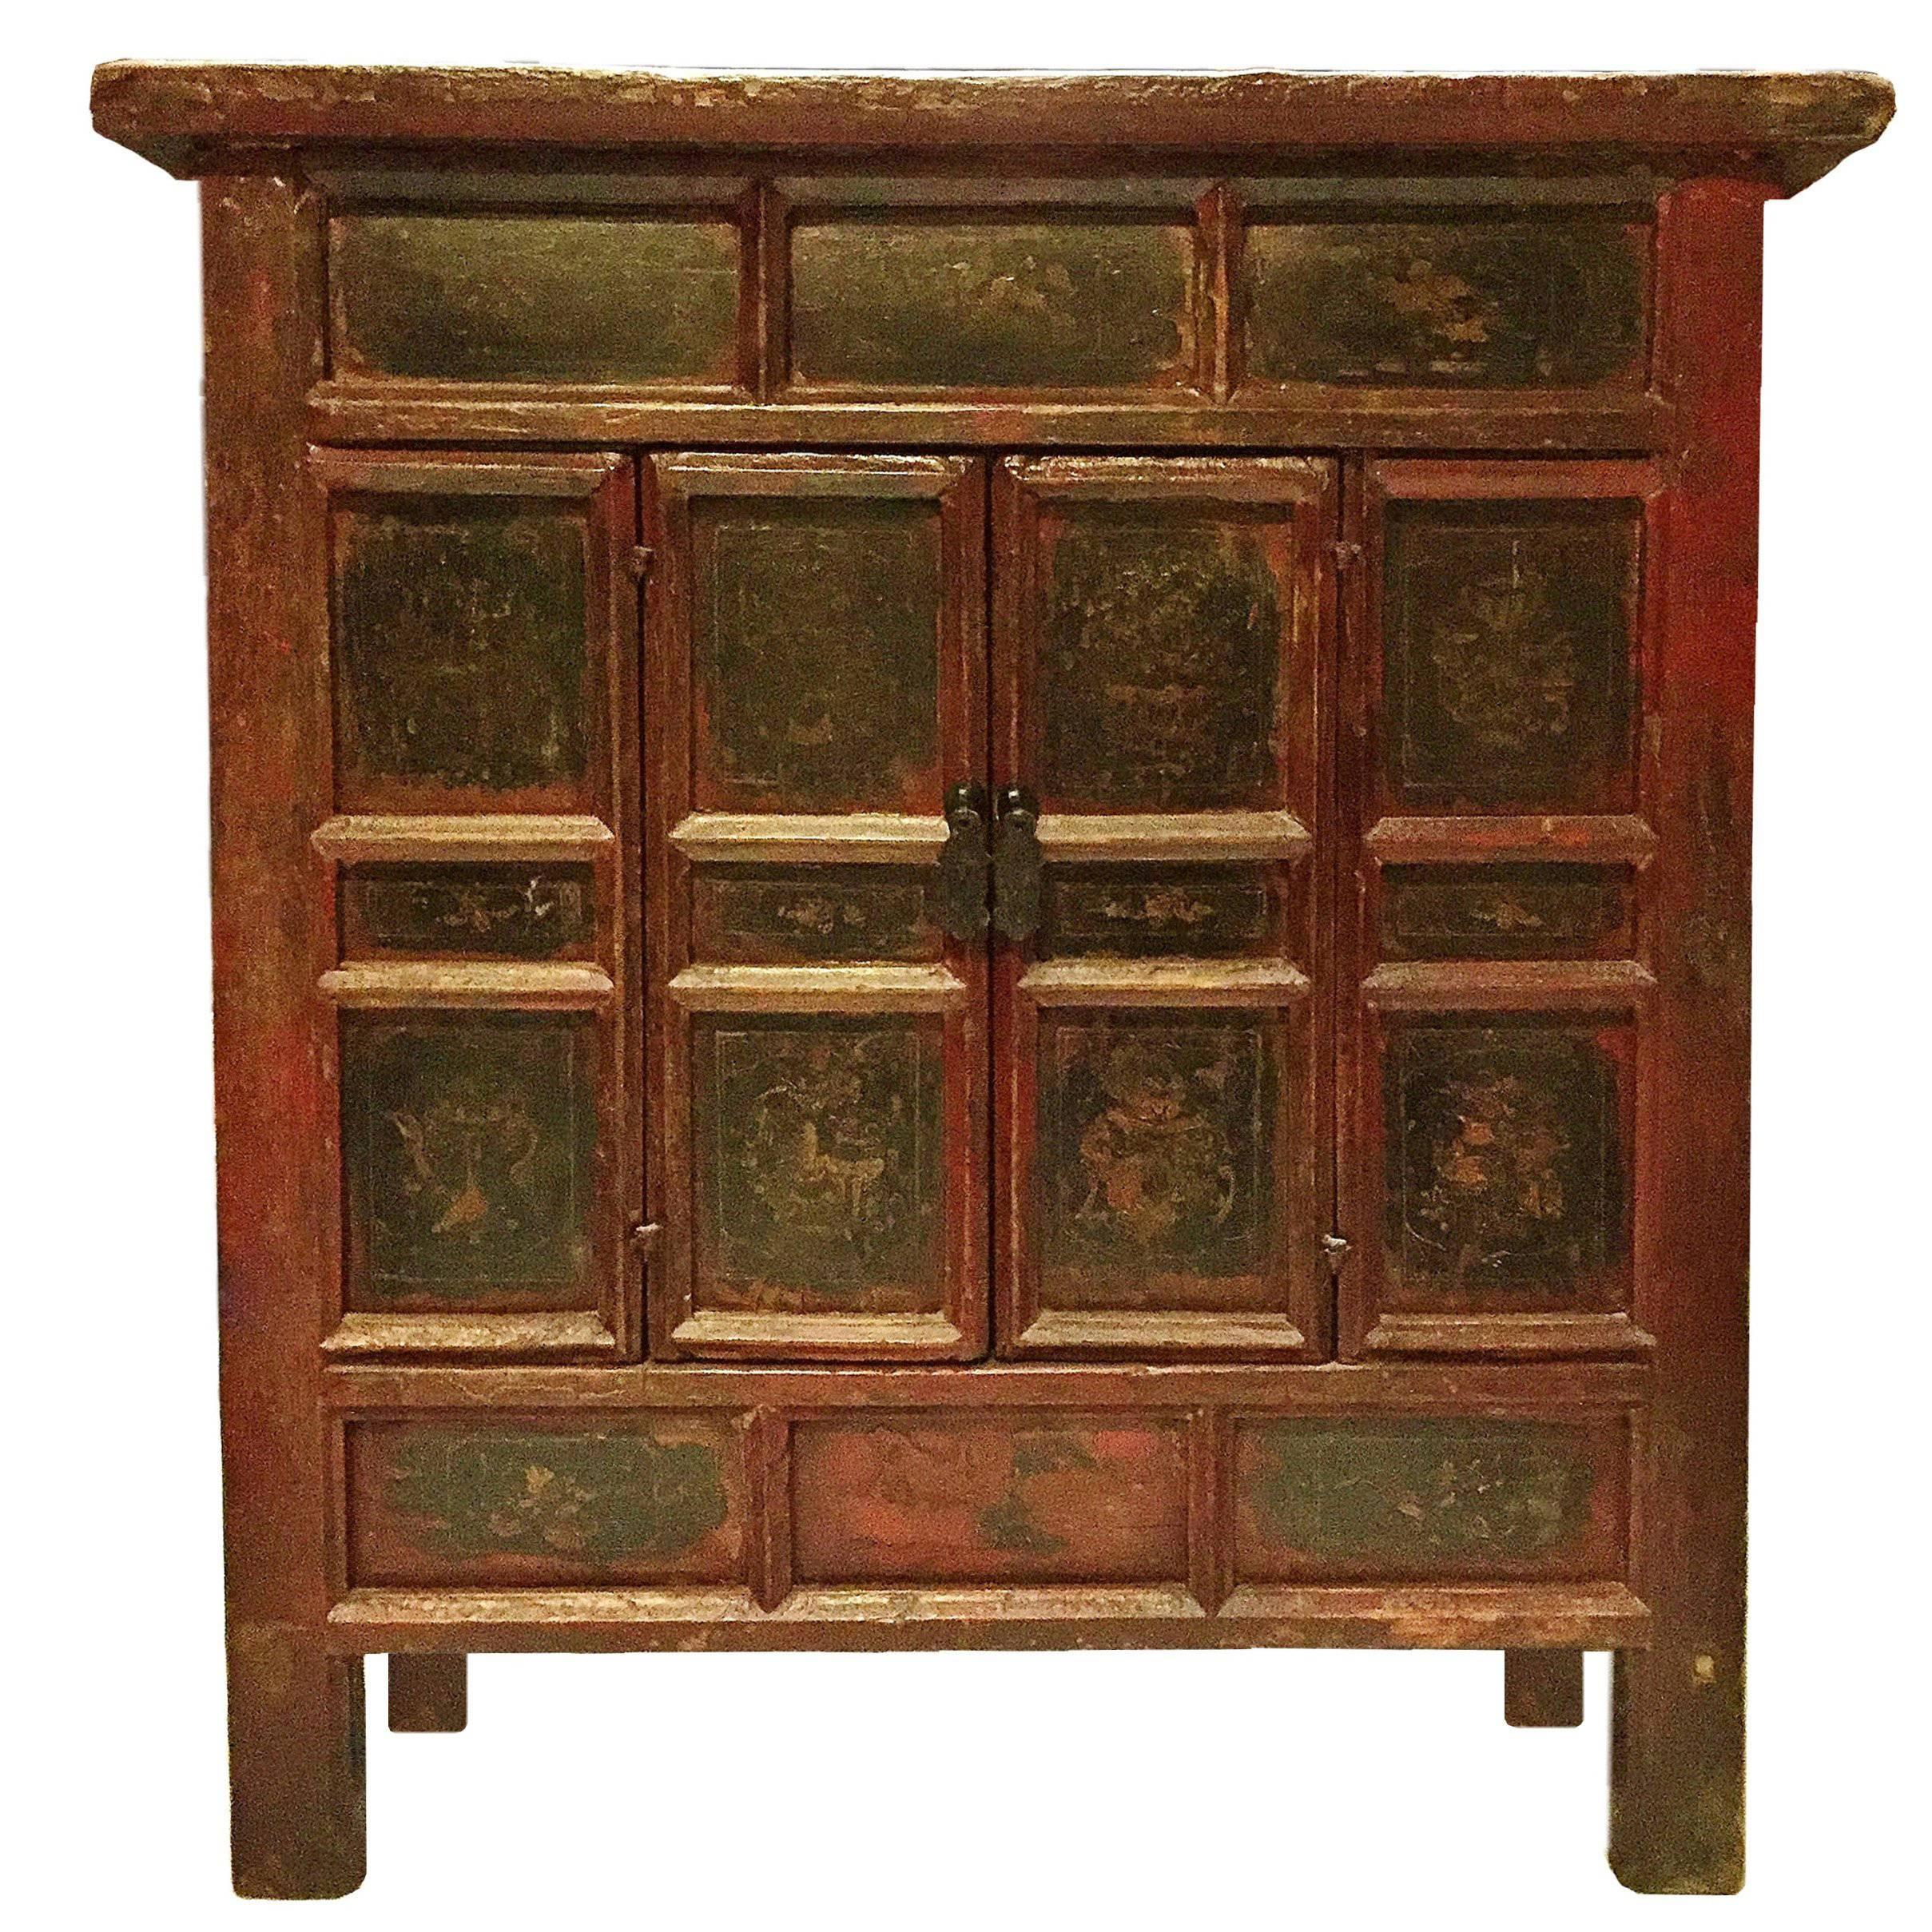 Early 19th Century Red and Black Chest with Very Old Original Paintings